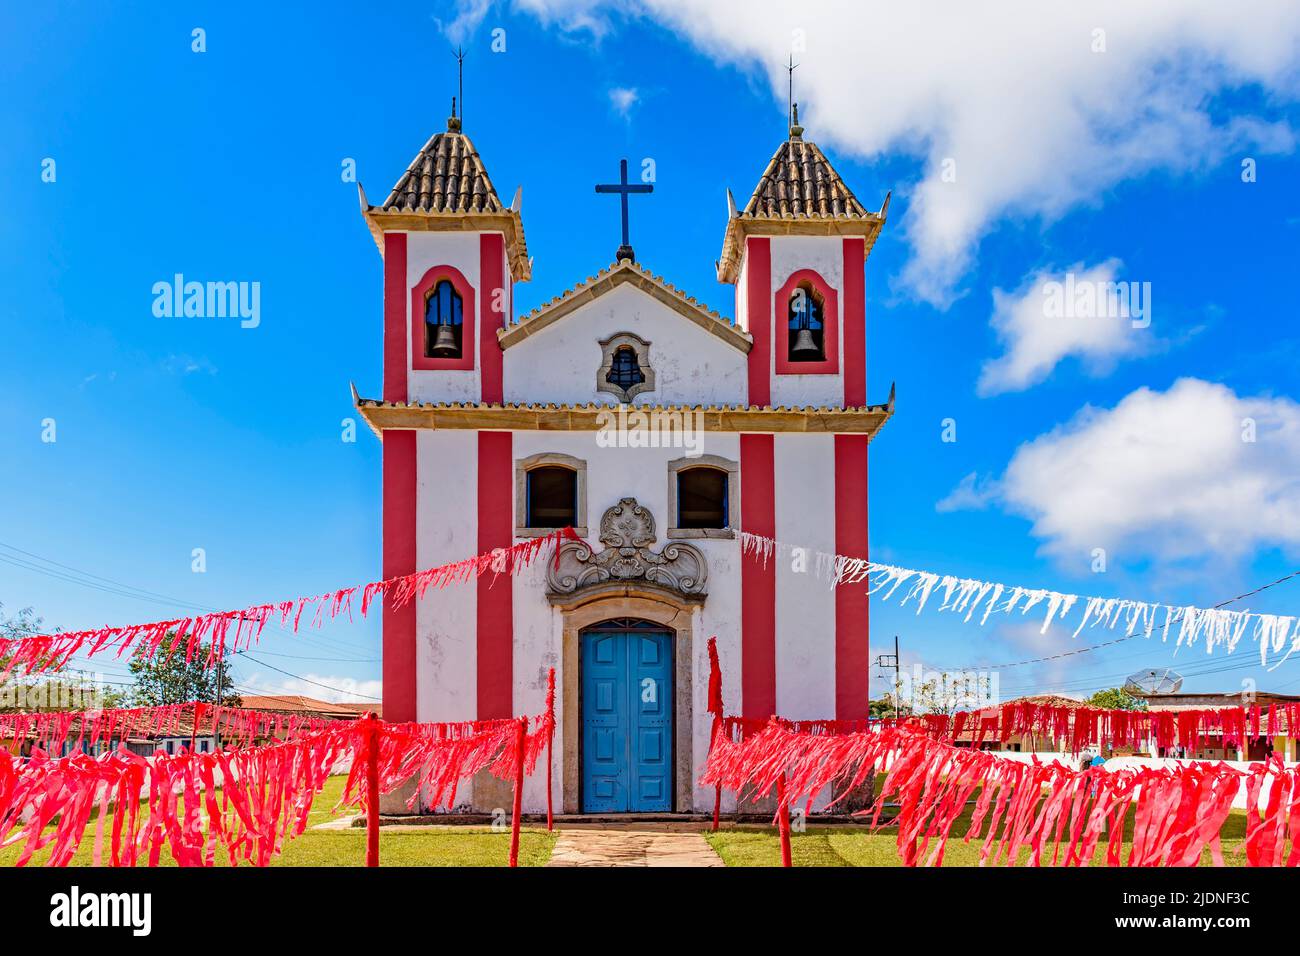 Small colonial-style chapel decorated with ribbons for a religious celebration in the small town of Lavras Novas, Ouro Preto district in Minas Gerais Stock Photo